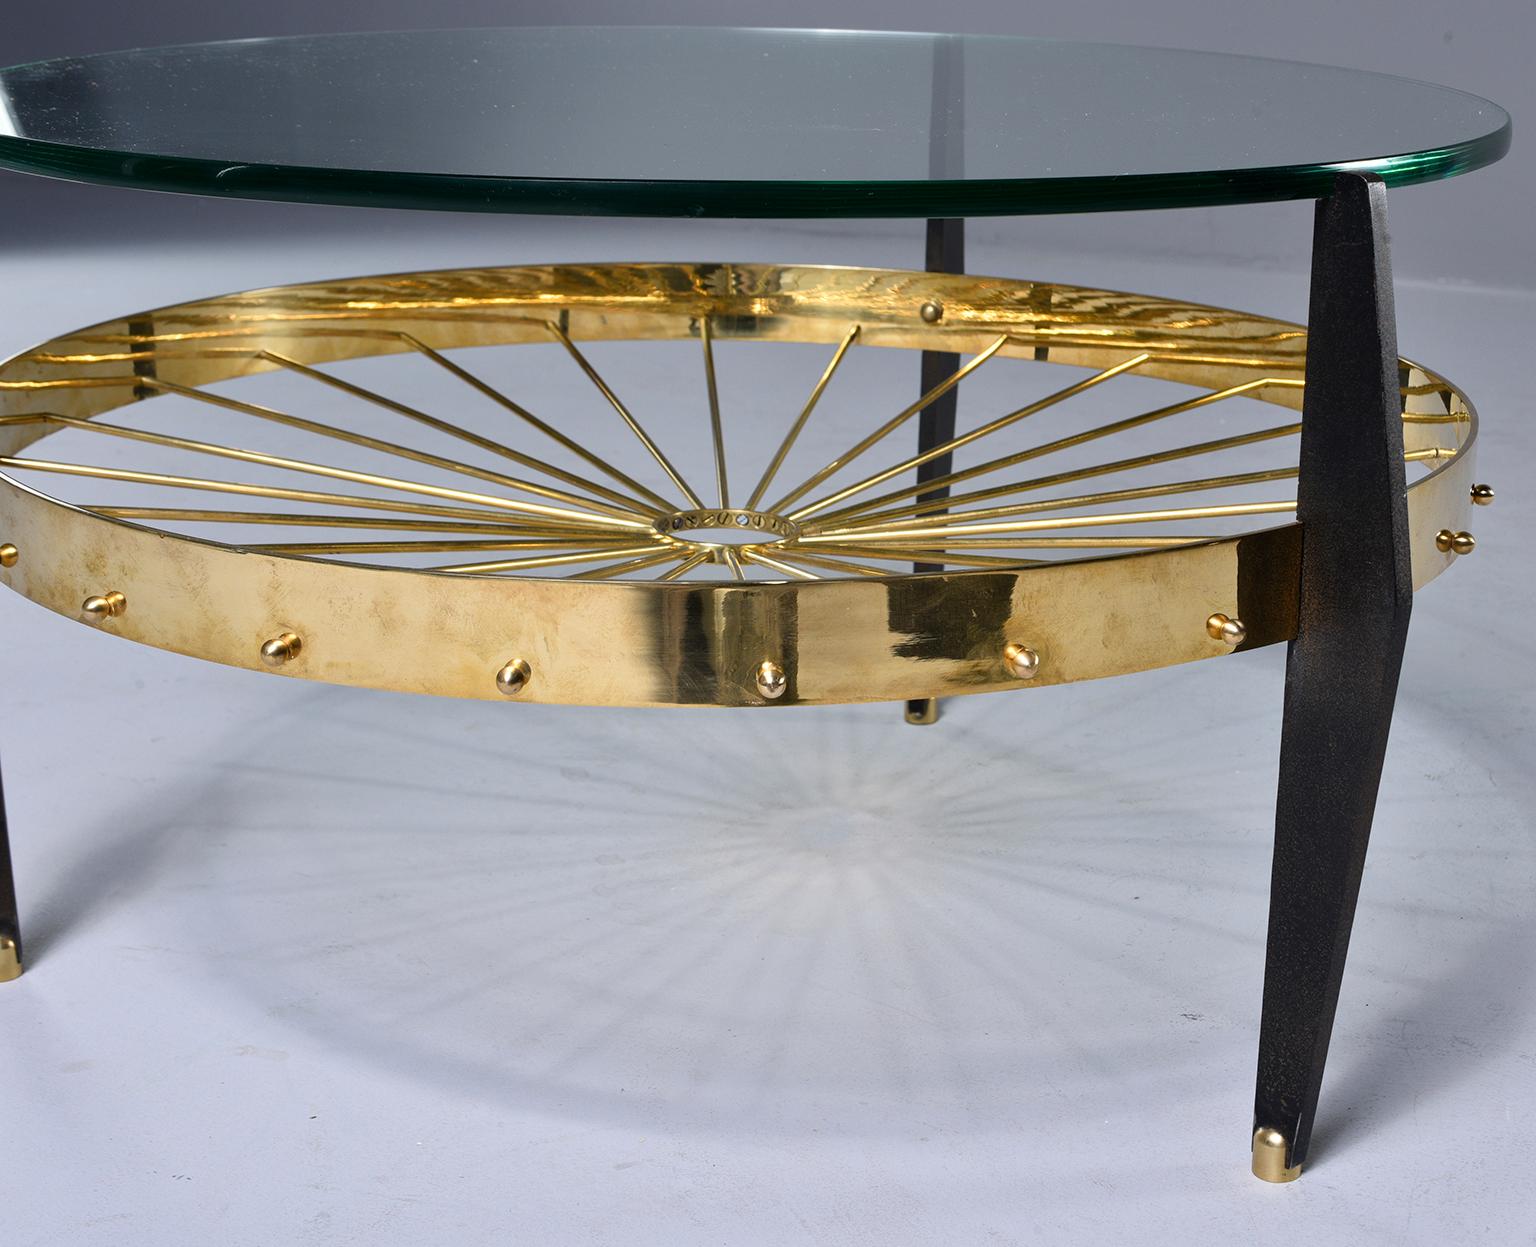 20th Century Italian Two-Tier Table with Brass Spokes Wood Legs and Glass Top